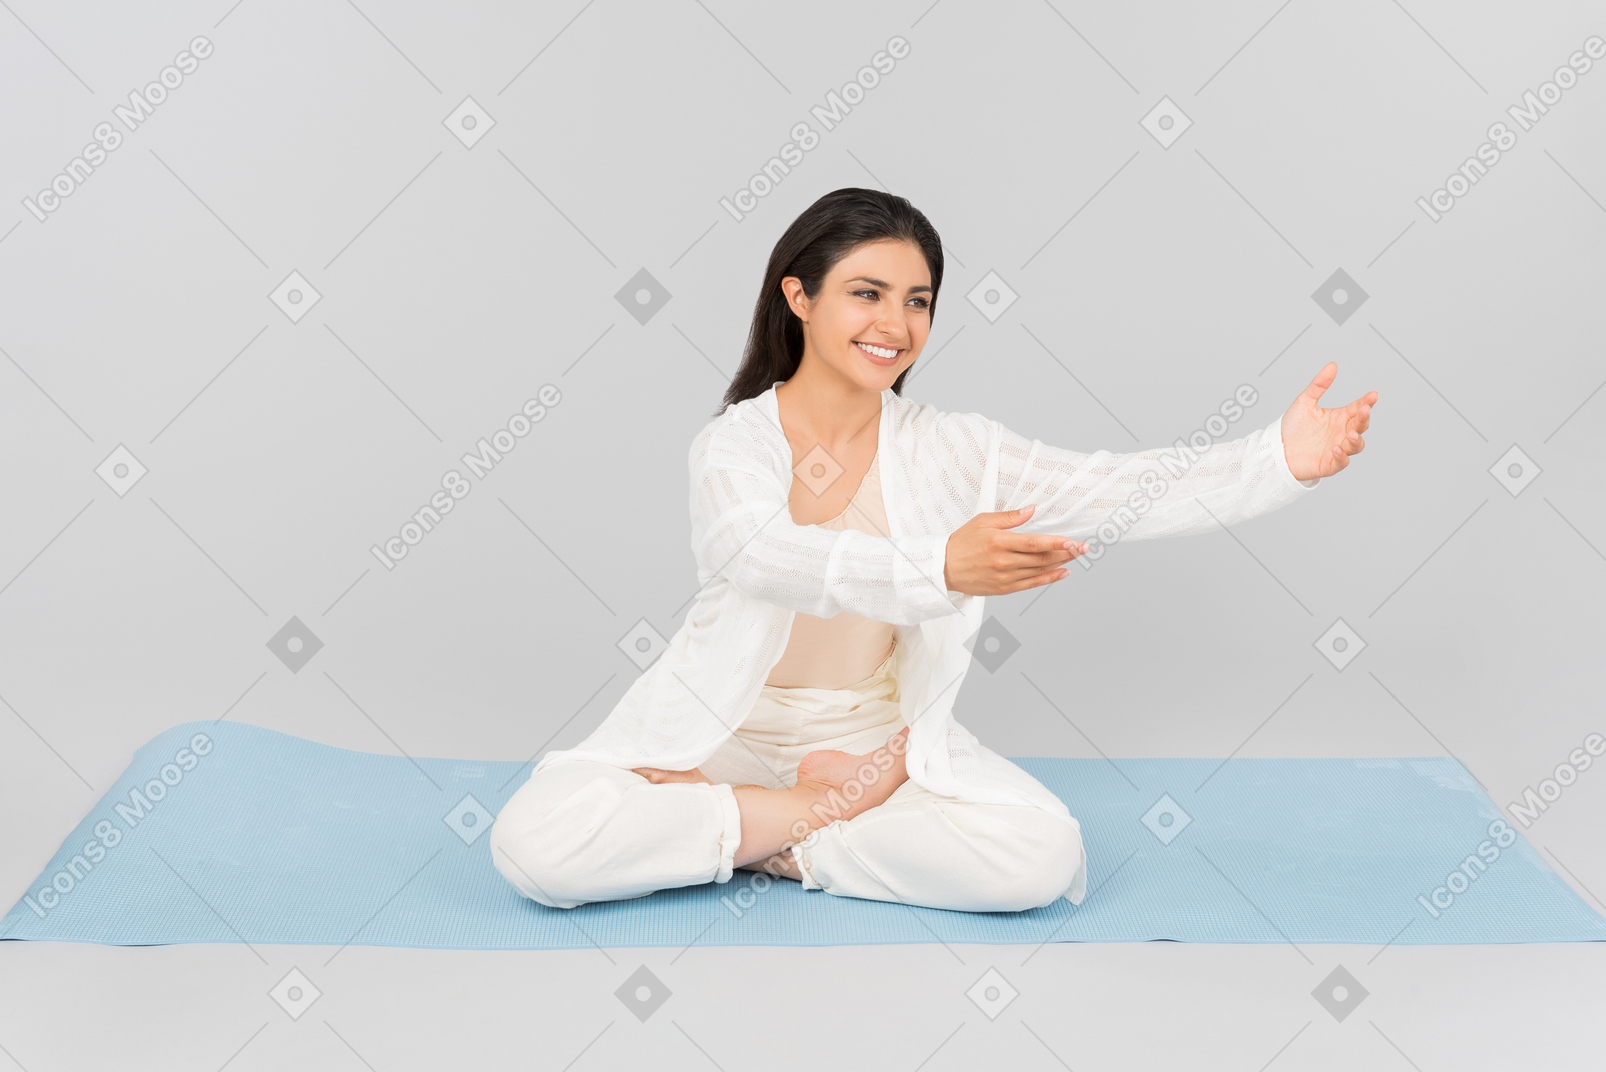 Young indian woman in yoga clothes outstretching a hand